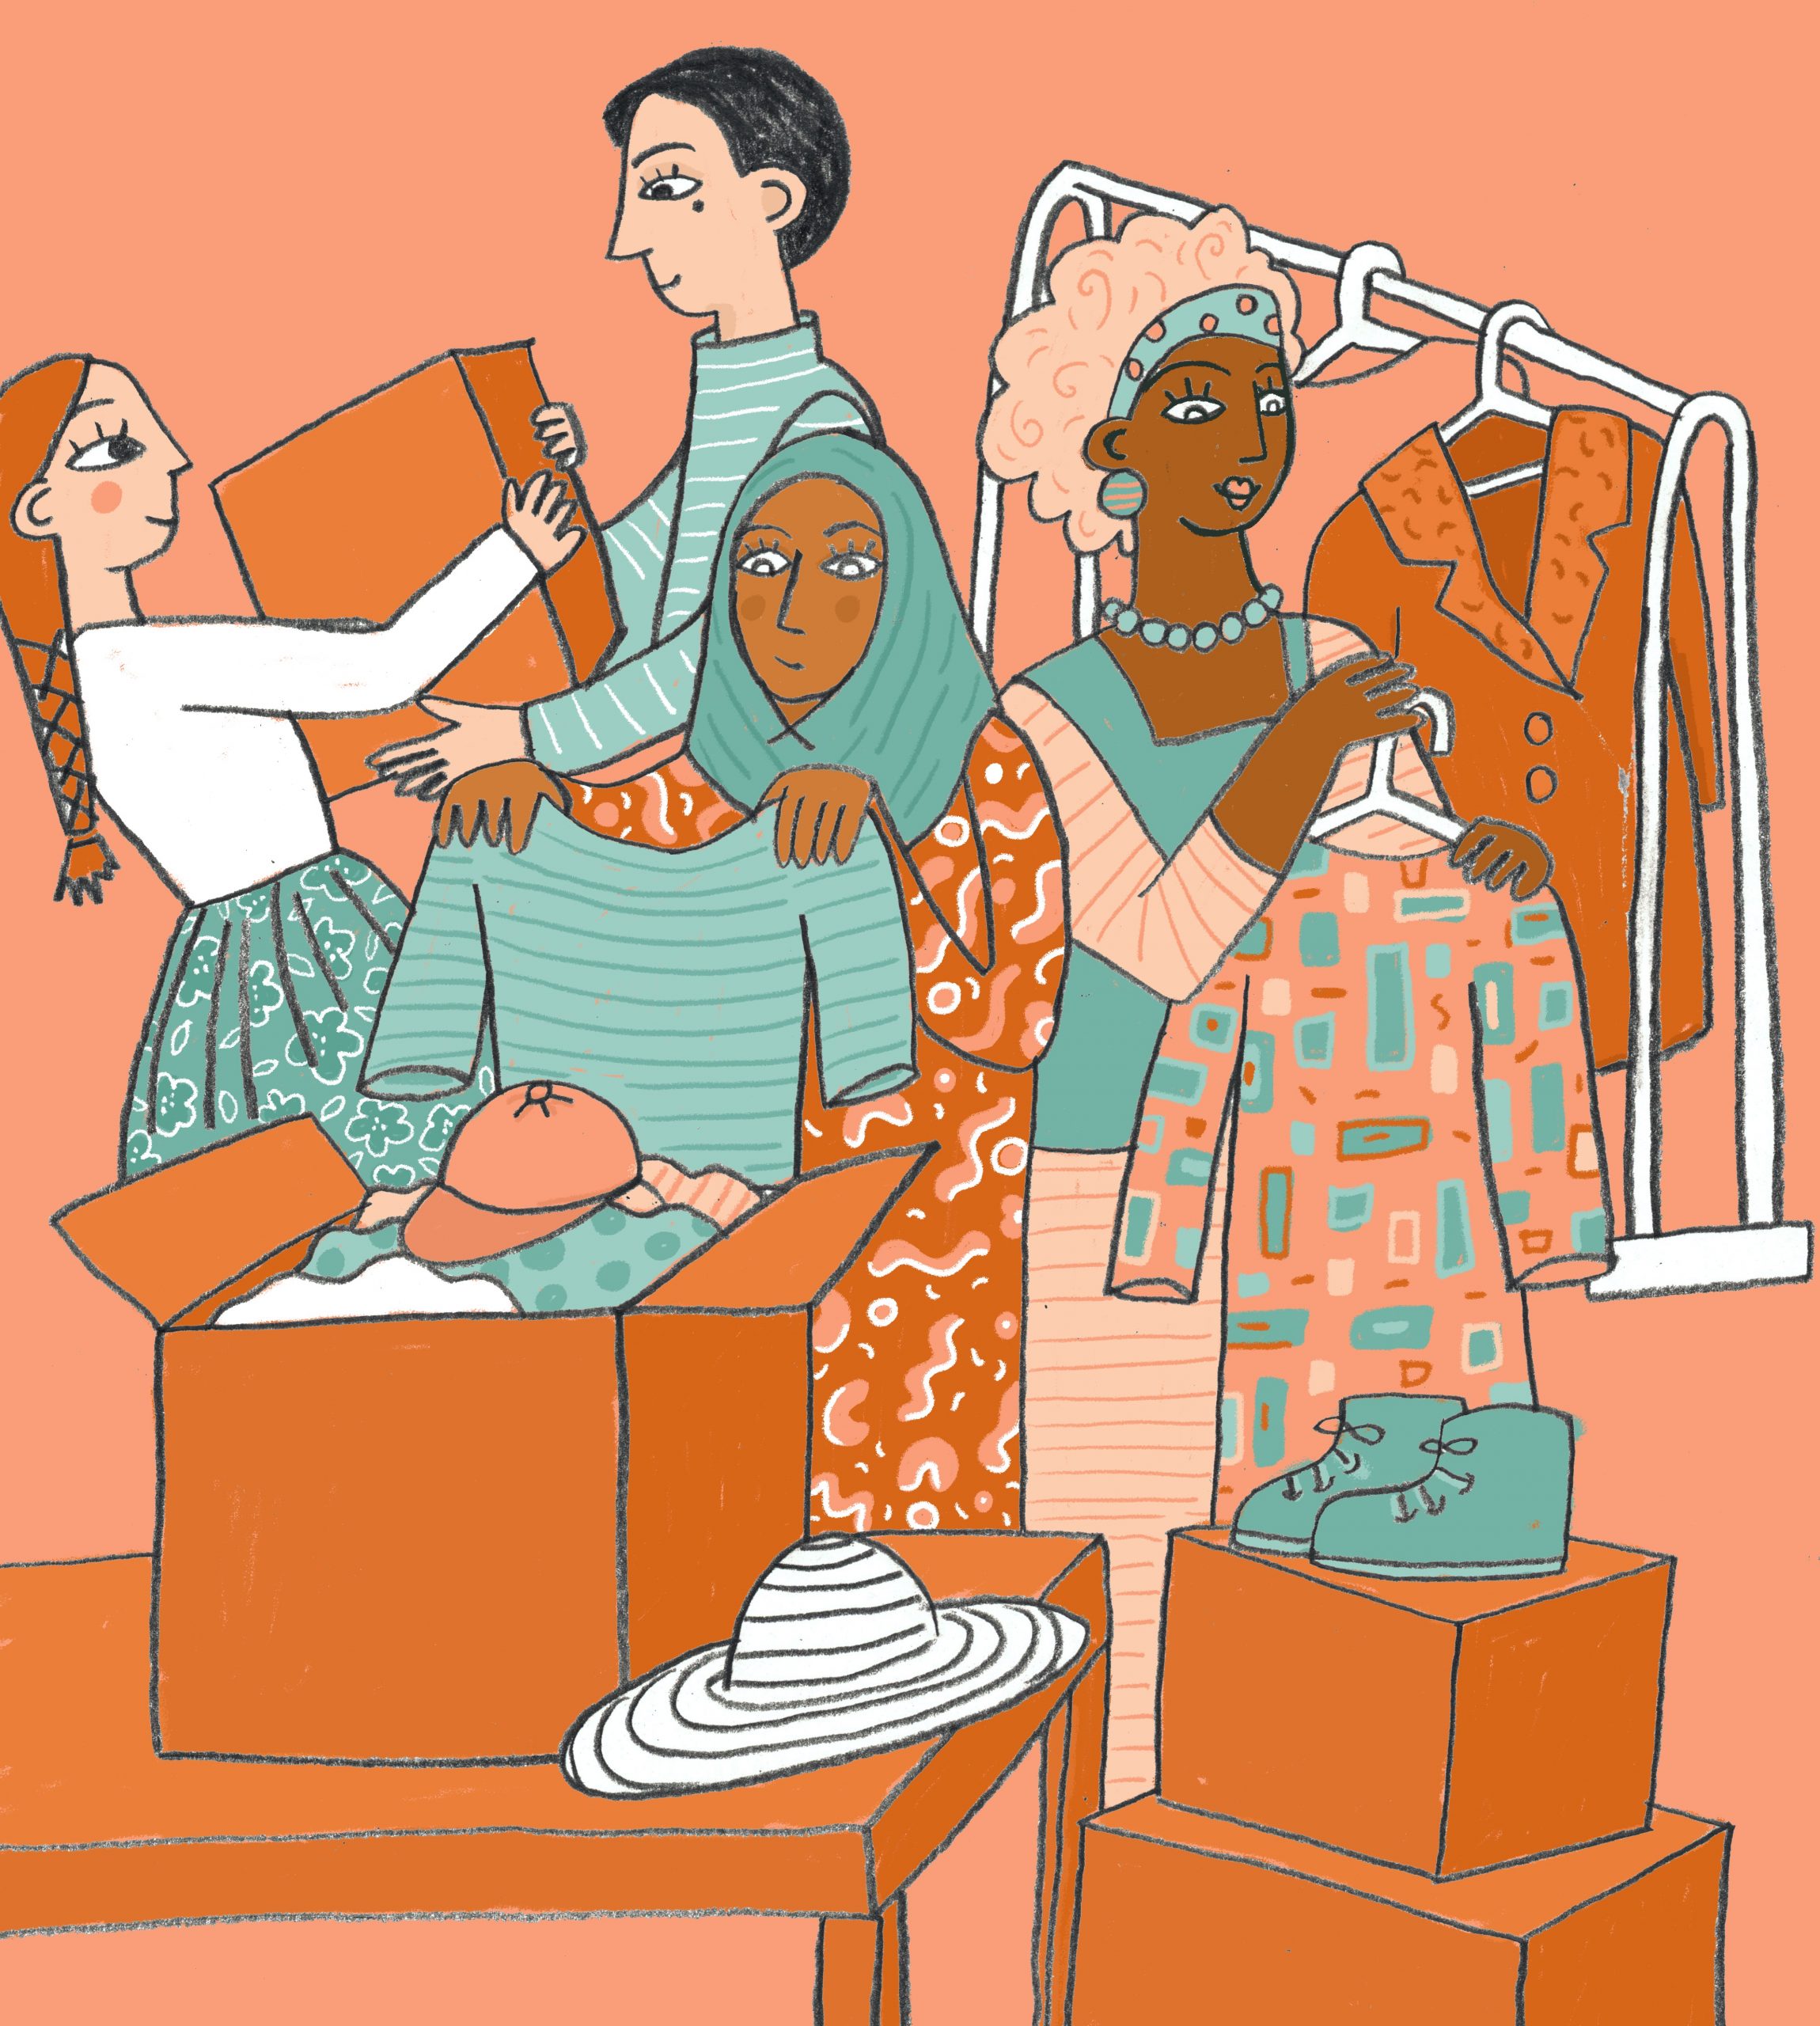 Illustration of people working to unpack and hang up boxes of clothes.